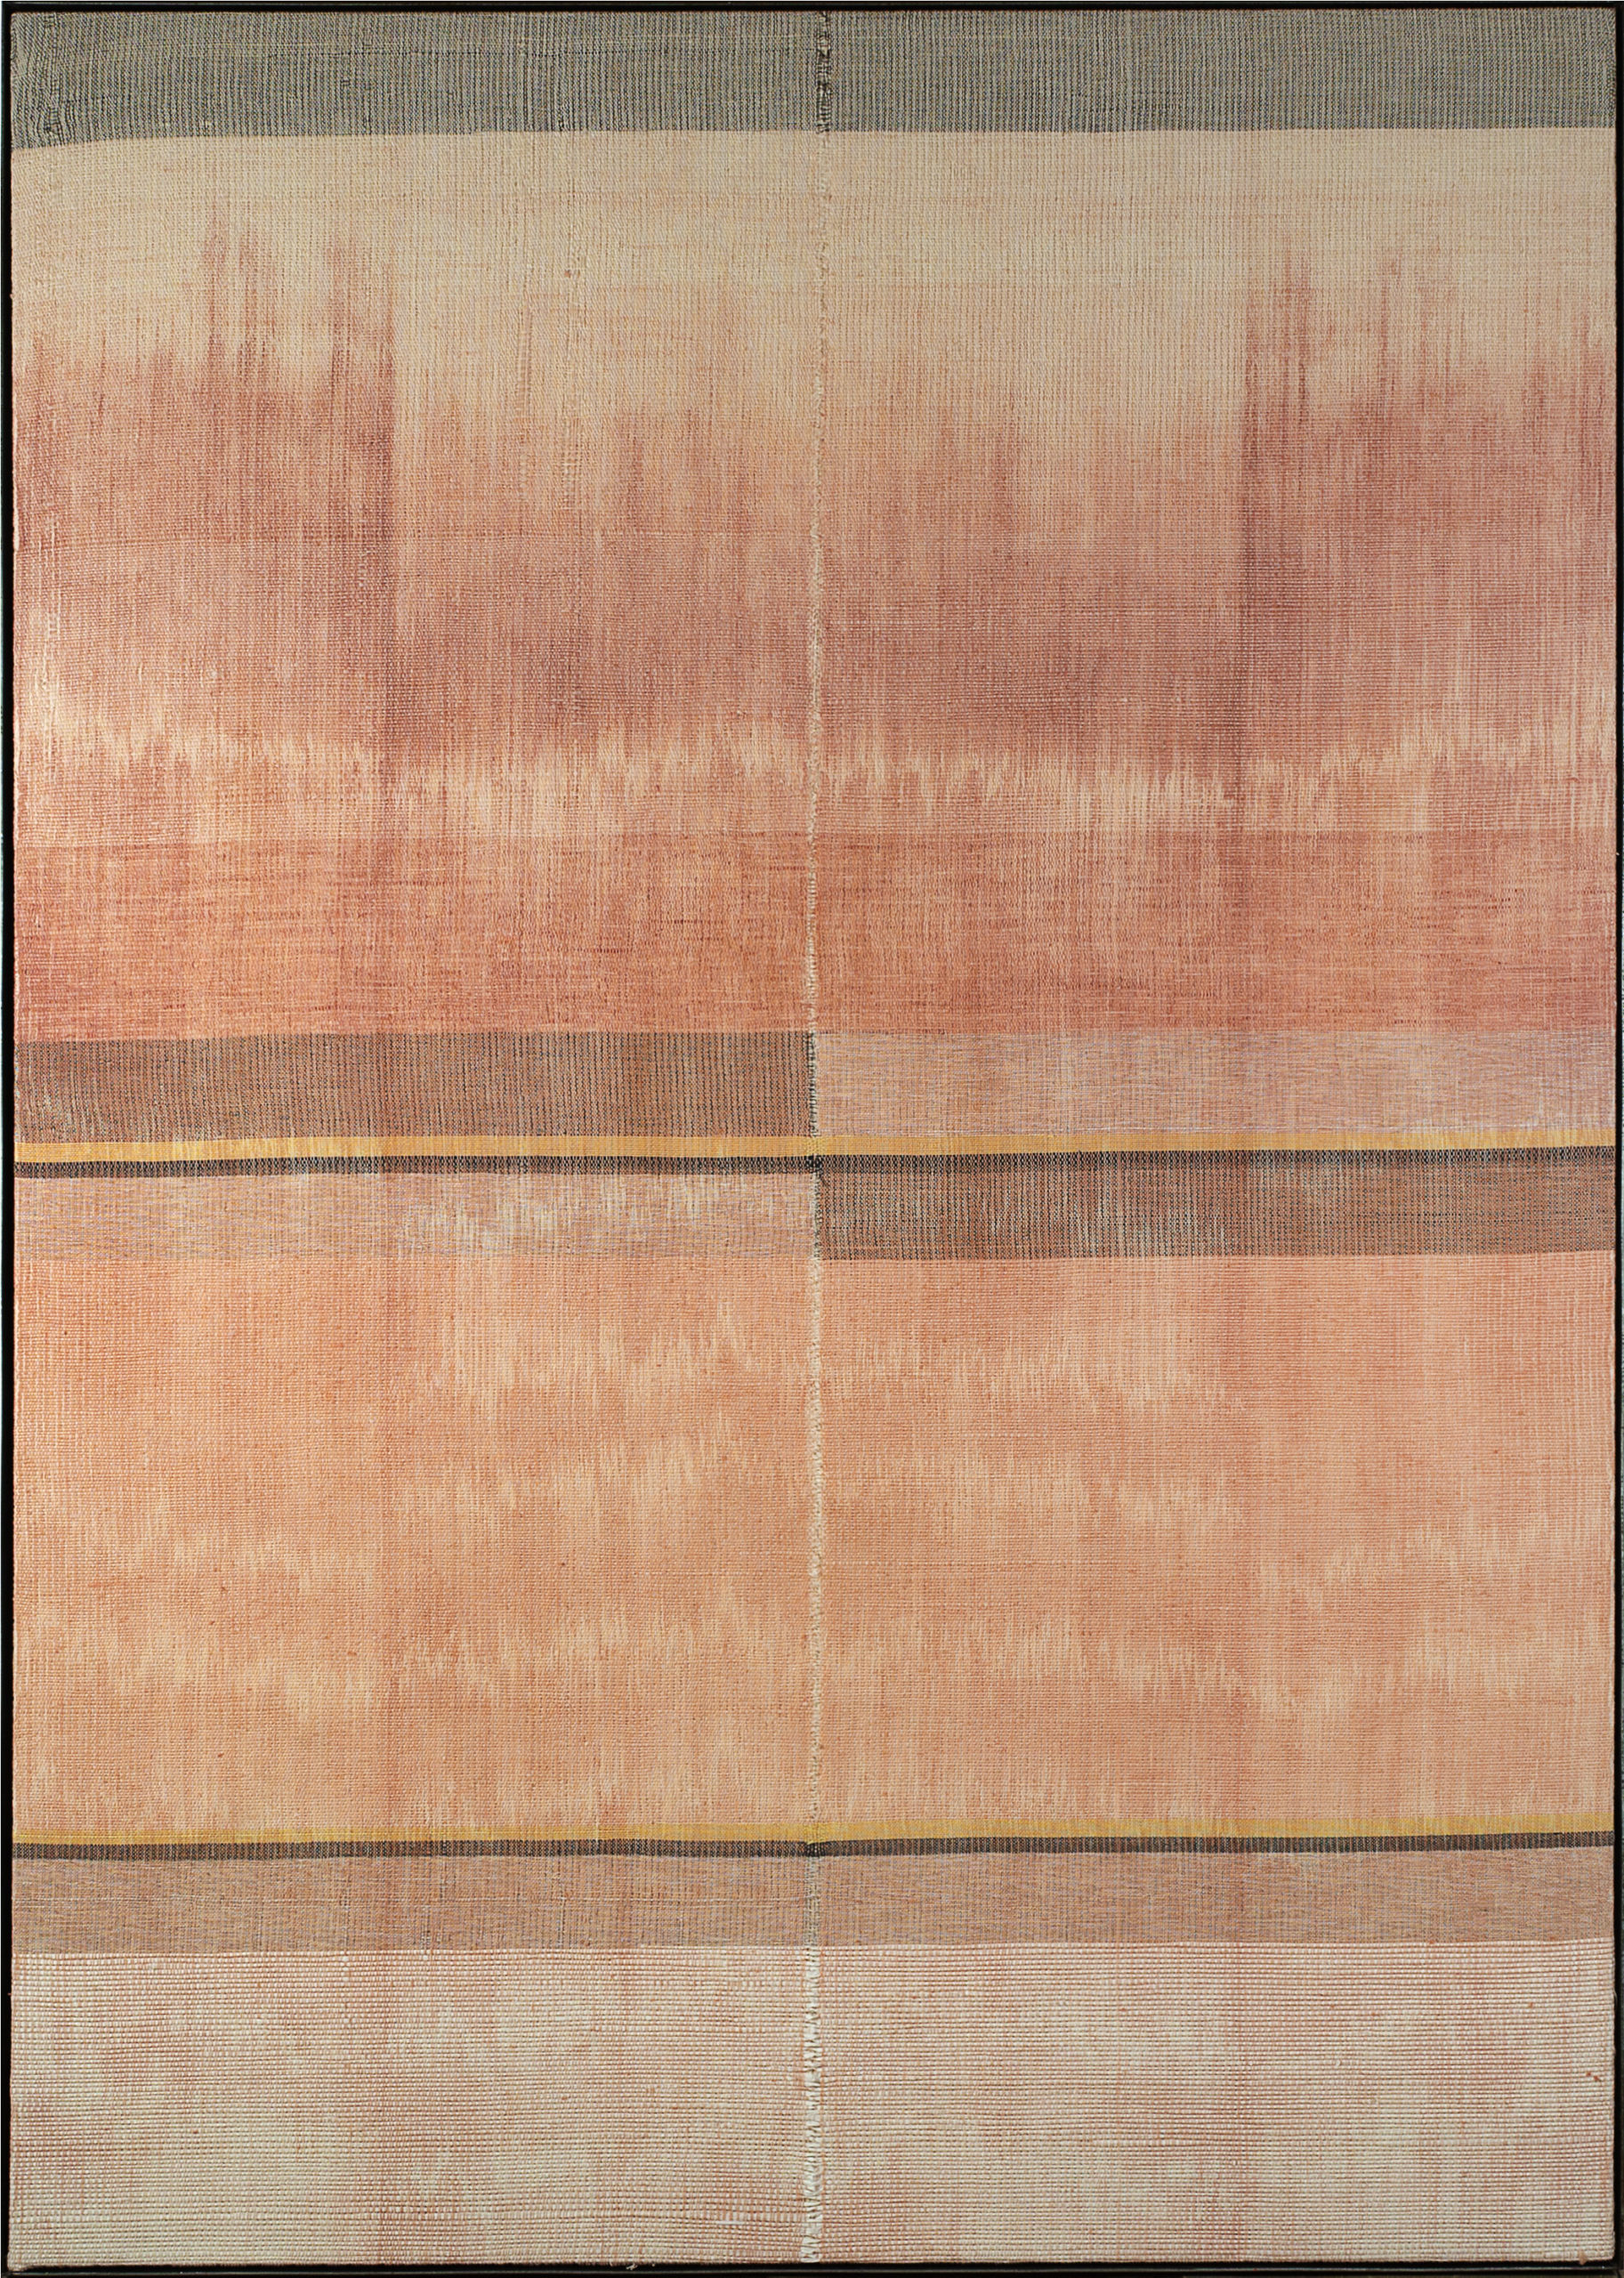 

											Elizabeth Hohimer</b>

											<em>
												Negotiated Desires</em> 

											<h4>
												May 21 - July 31											</h4>

		                																																													<i>Rain Sang,</i>  
																																								2021, 
																																								West Texas cotton dyed with collected clays, pine paper and rayon tapestry set in steel frame, 
																																								84 x 60 x 2 1/2 inches 
																								
		                				